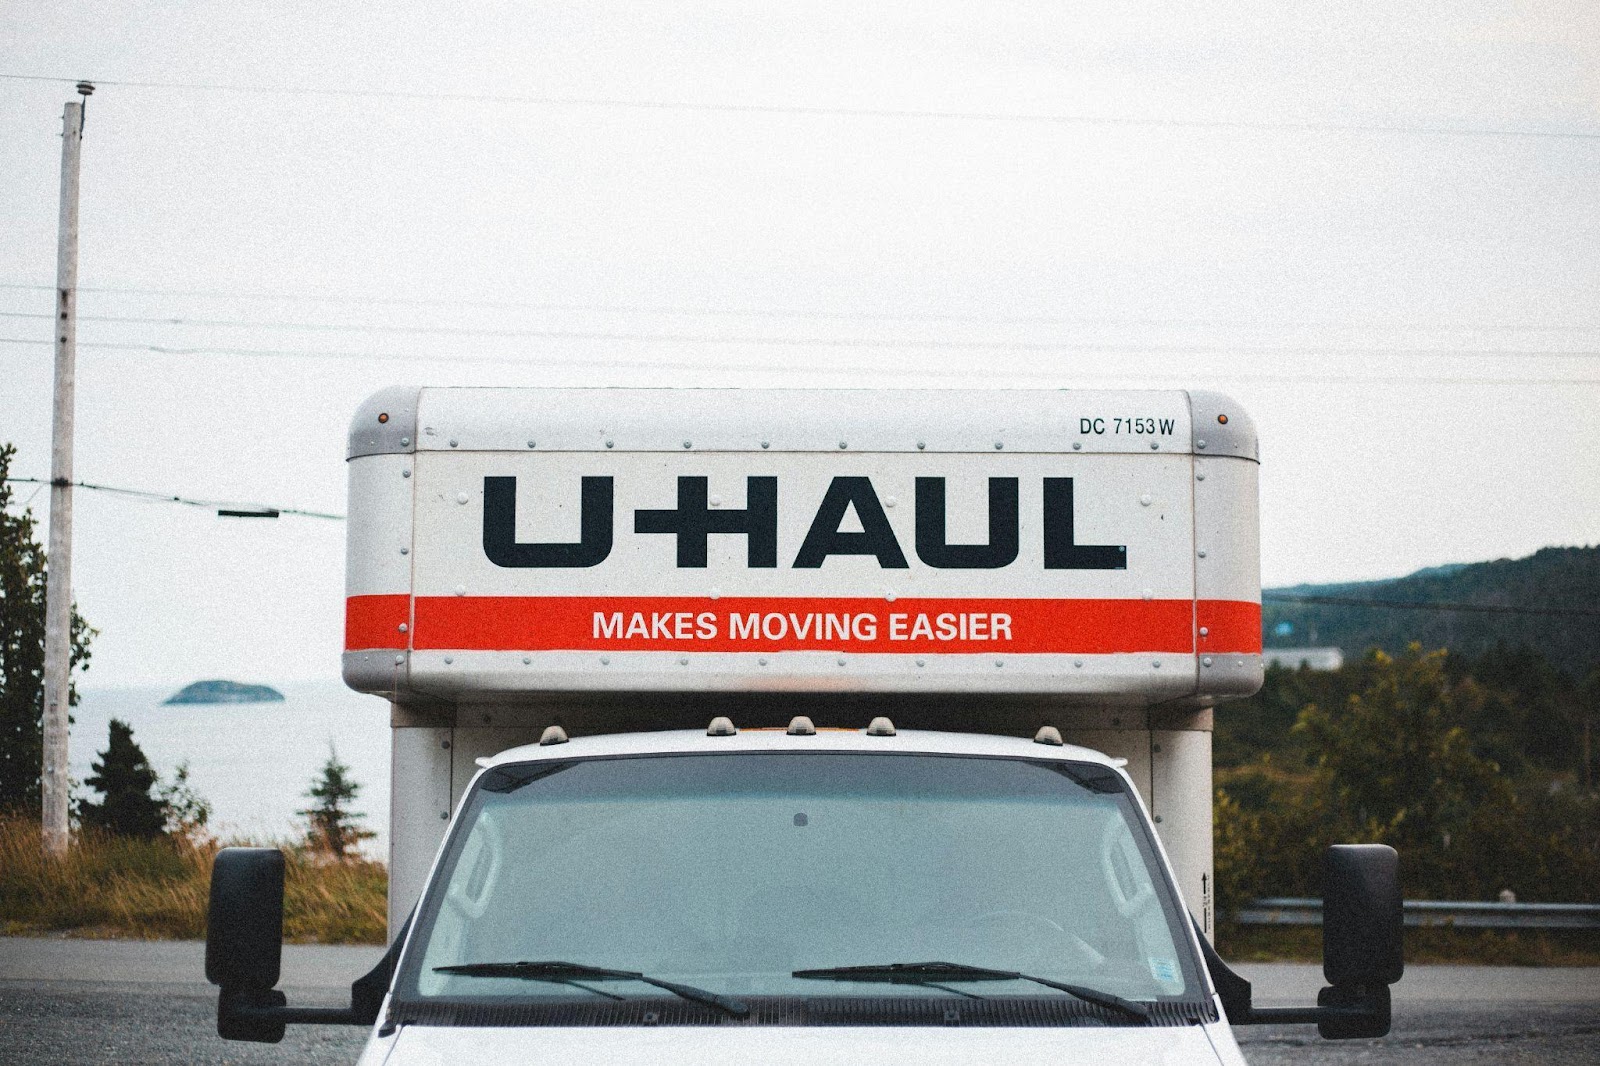 https://unsplash.com/photos/a-white-moving-truck-parked-in-a-parking-lot-is_2lGqtRJg